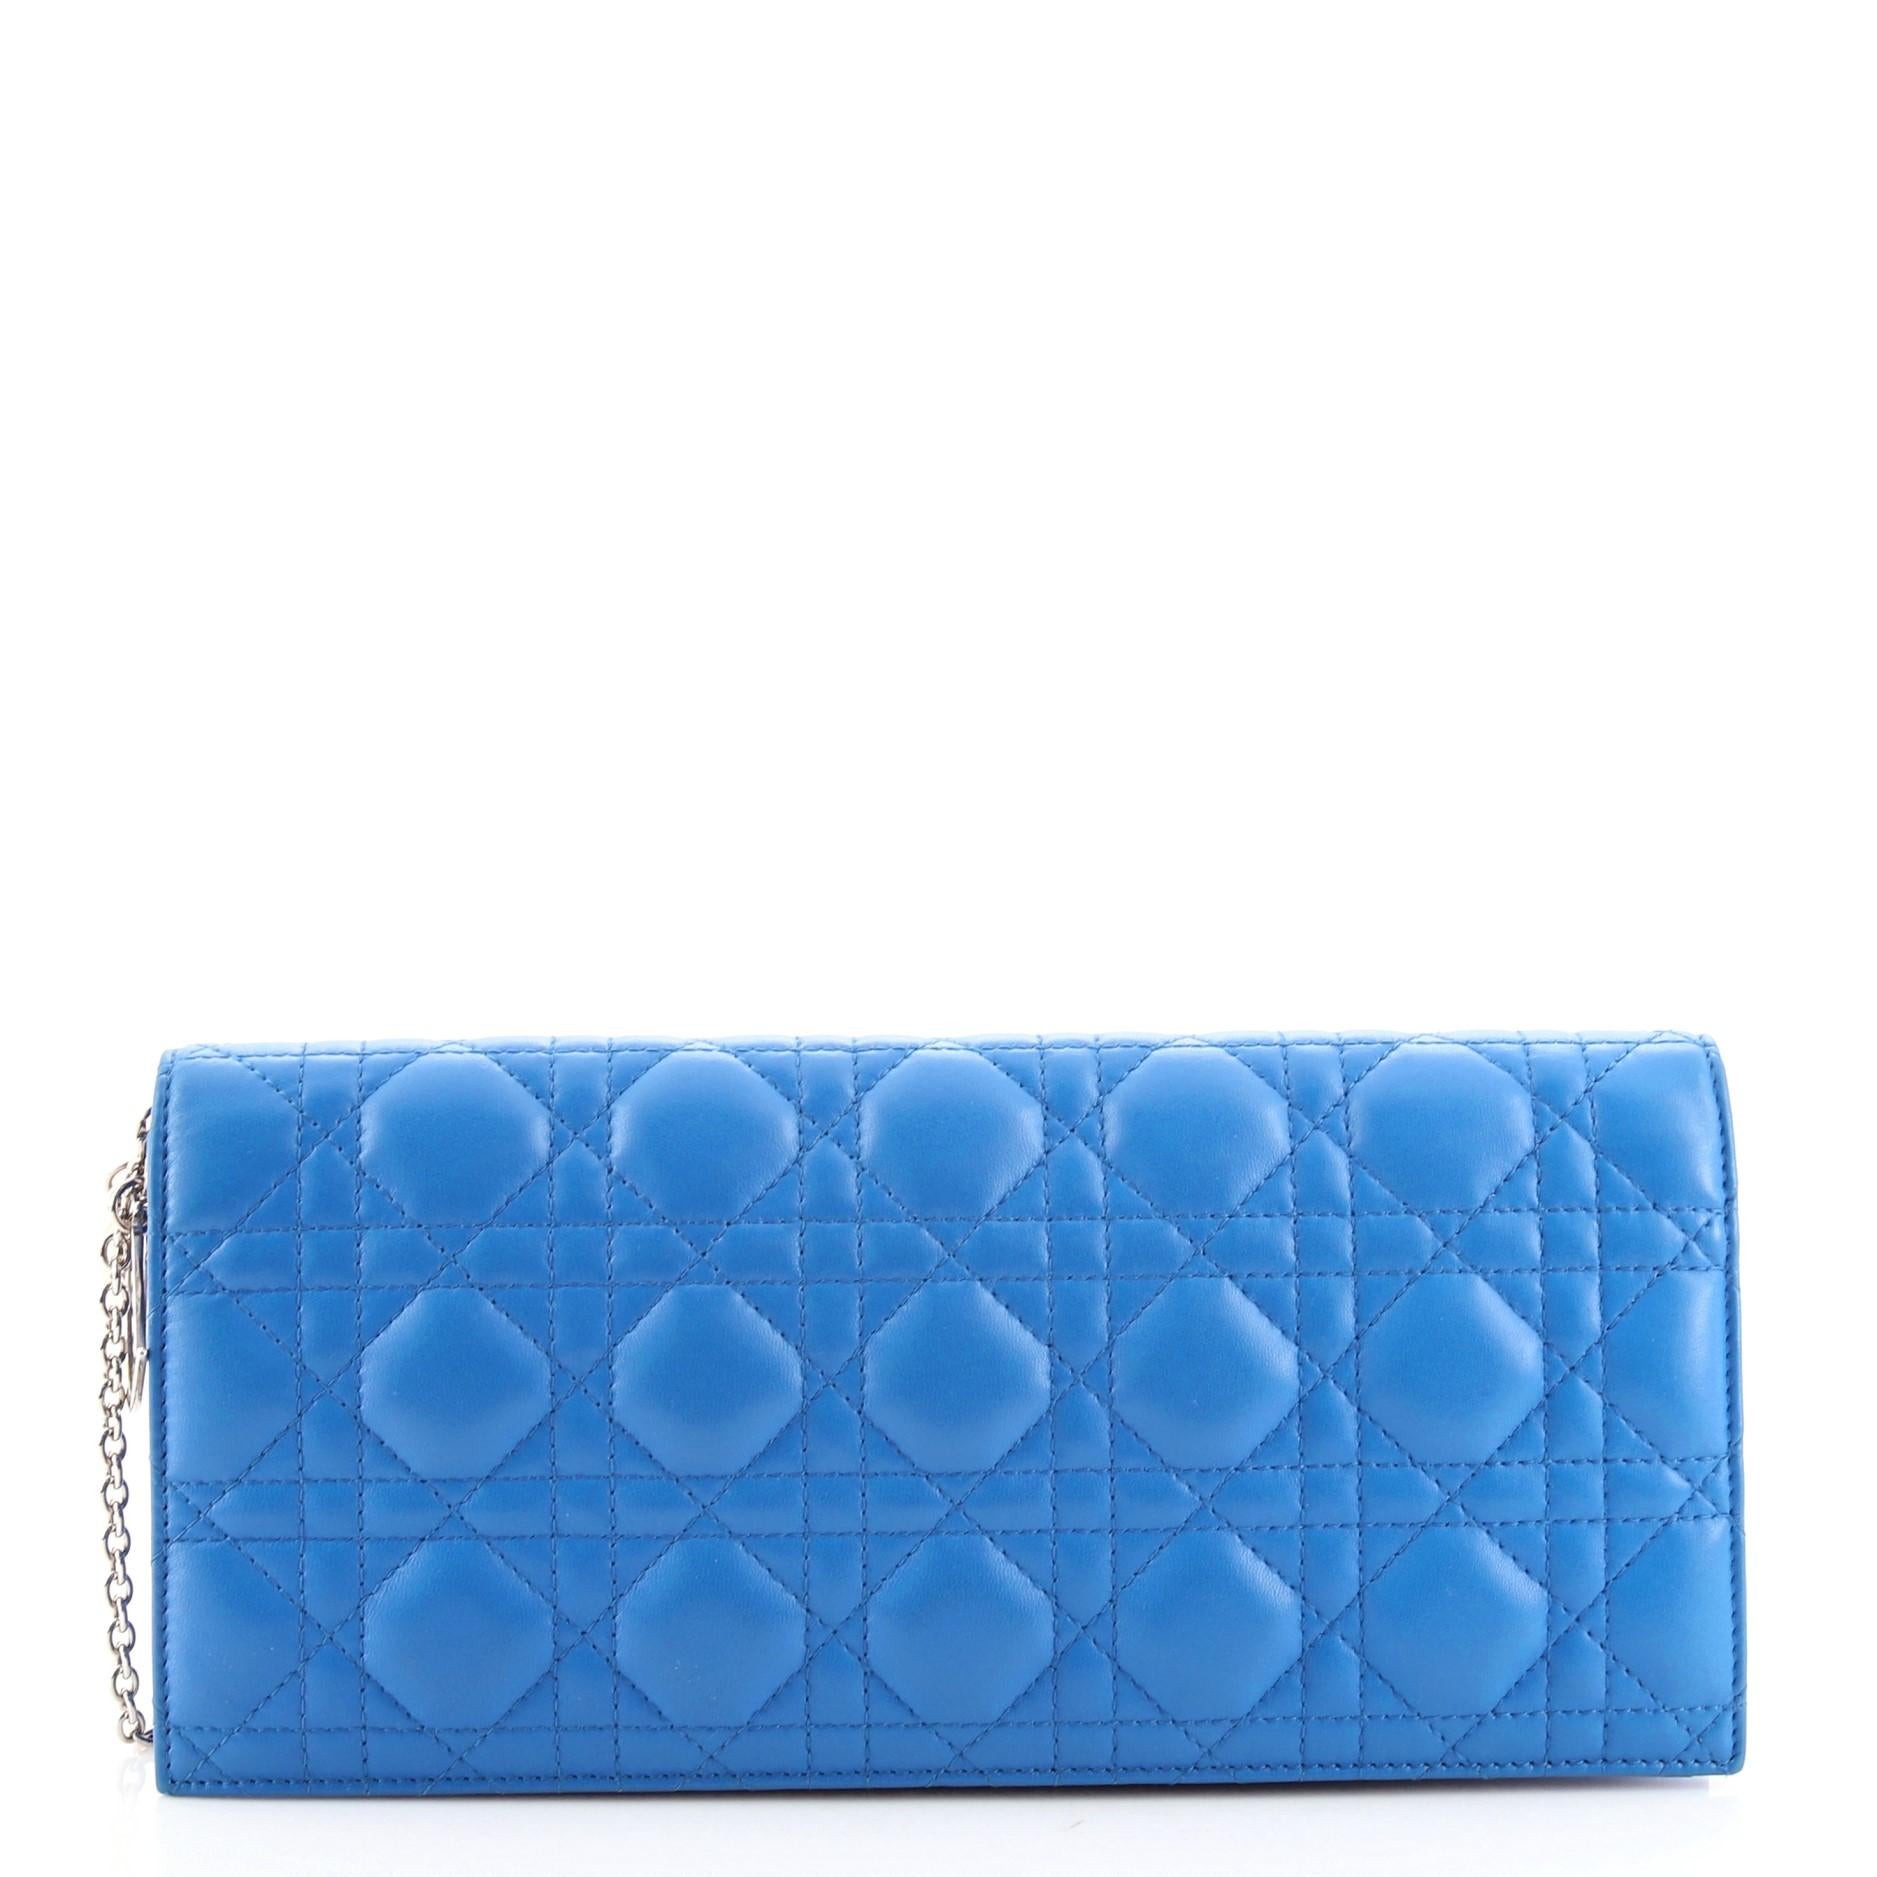 Blue Christian Dior Lady Dior Convertible Chain Clutch Cannage Quilt Leather Long